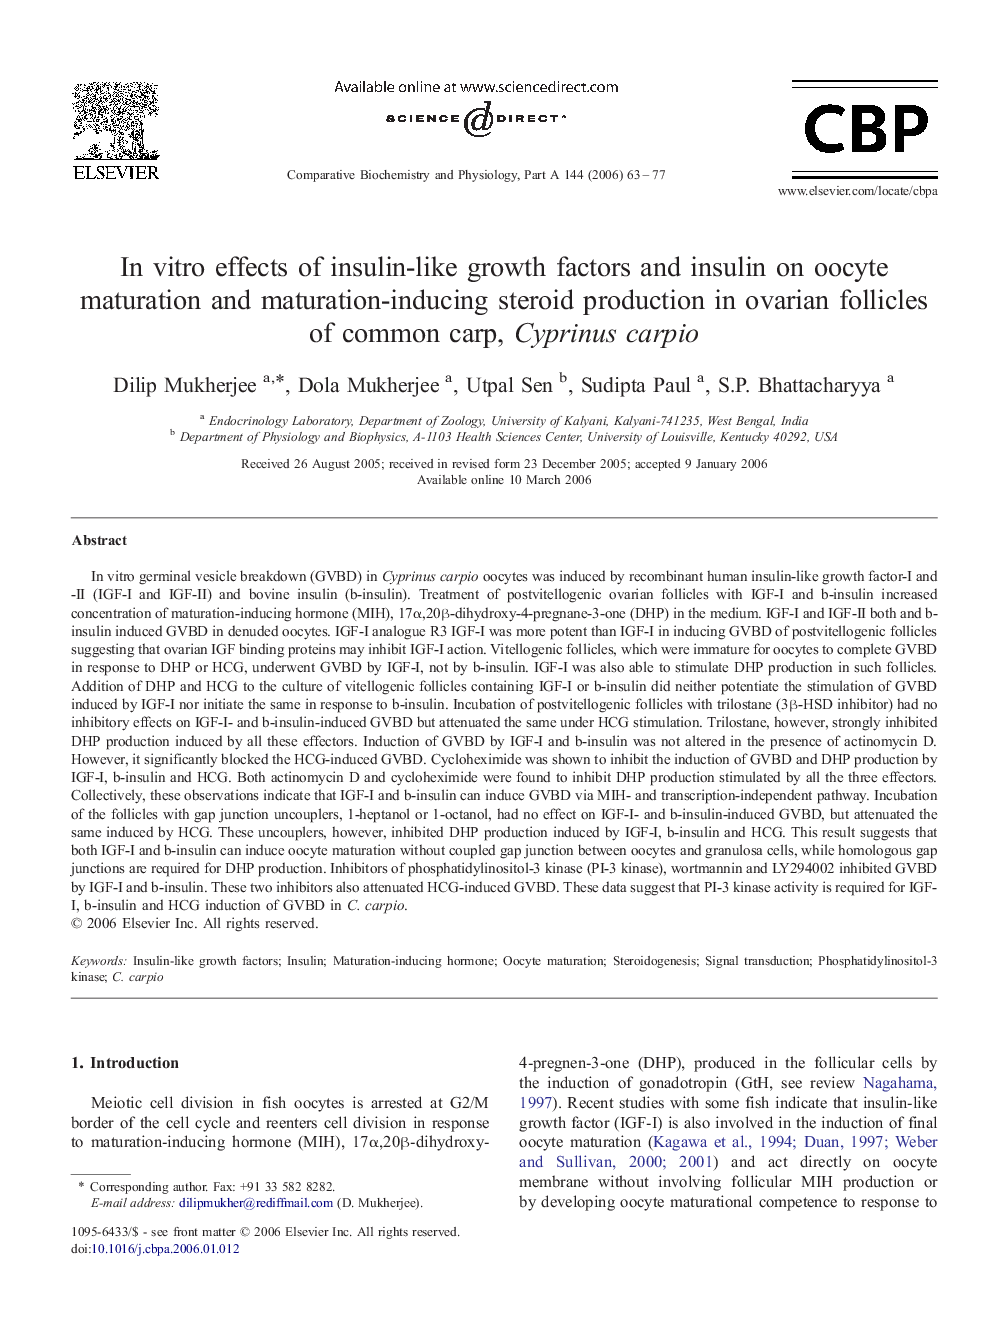 In vitro effects of insulin-like growth factors and insulin on oocyte maturation and maturation-inducing steroid production in ovarian follicles of common carp, Cyprinus carpio